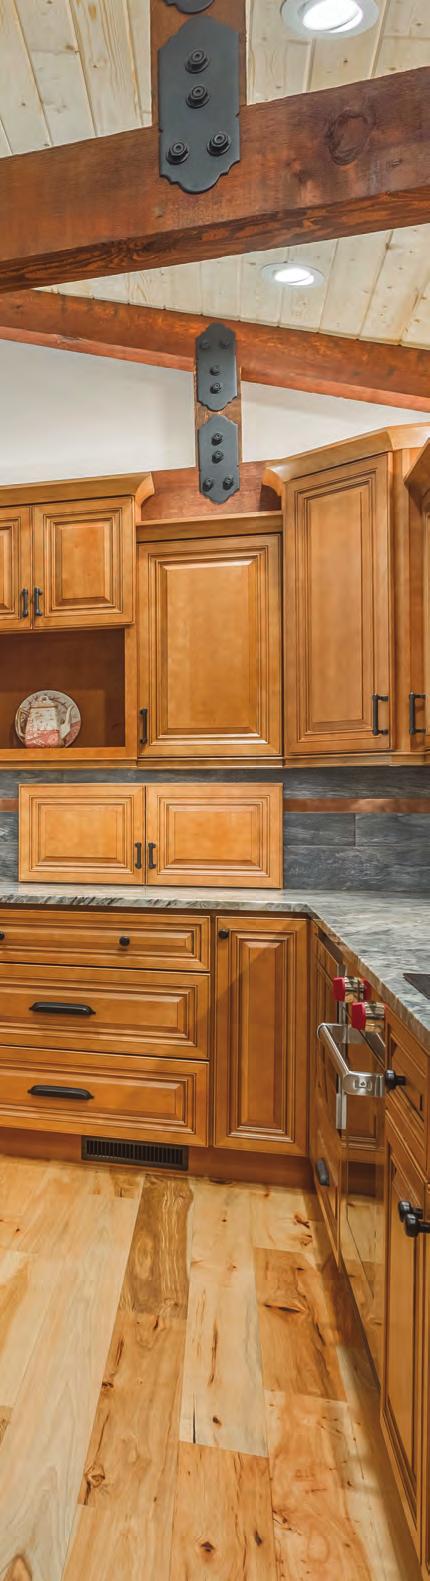 Our History Our first J&K Cabinetry company was originated in Atlanta, Georgia back in 2003, with our goal of providing to our customers the highest quality of cabinets available at an affordable